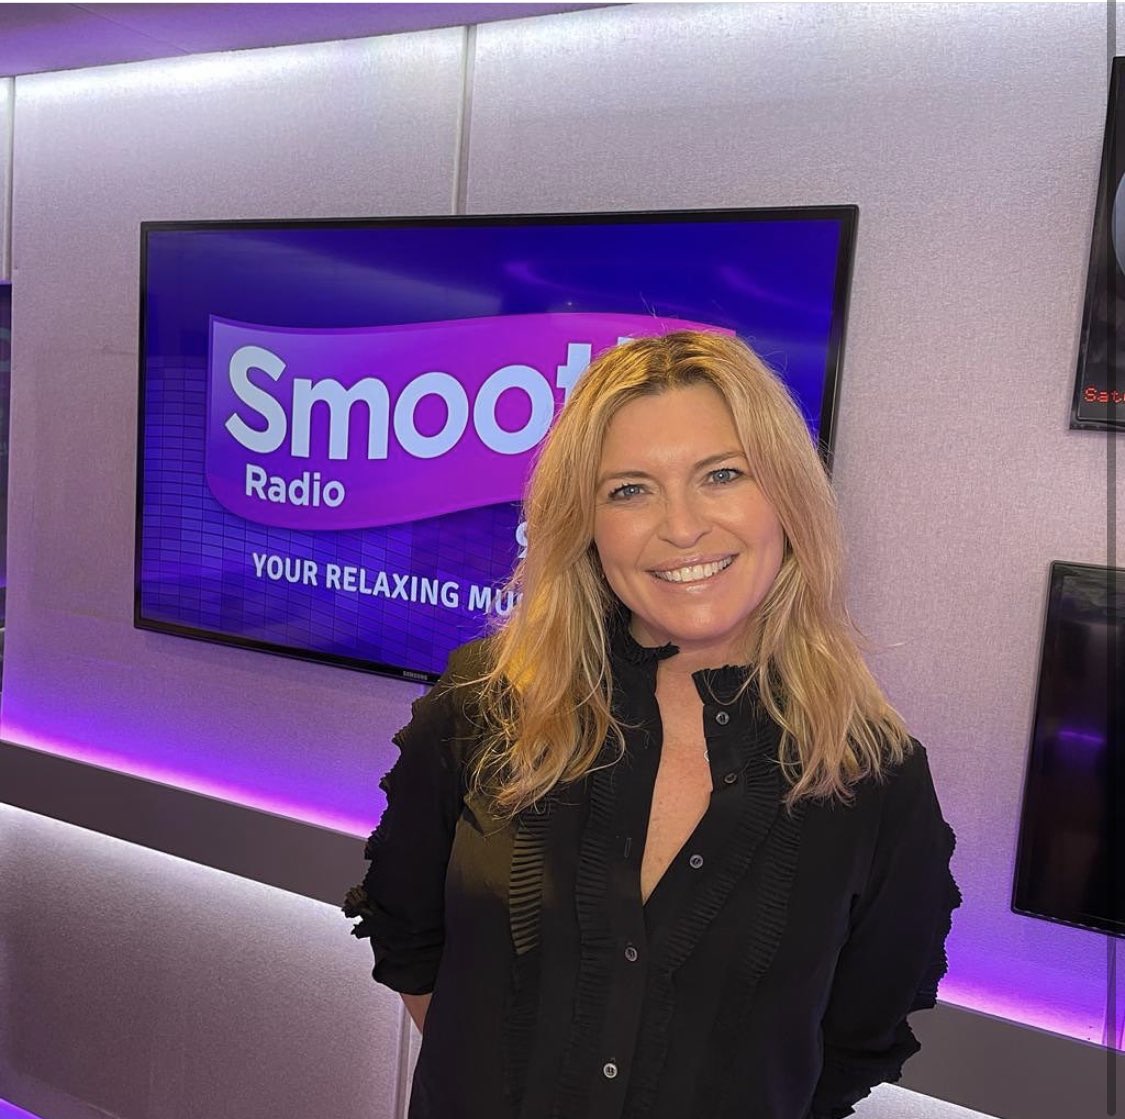 Join me this afternoon for some Smooth Sunday tunes @SmoothRadio ❤️❤️